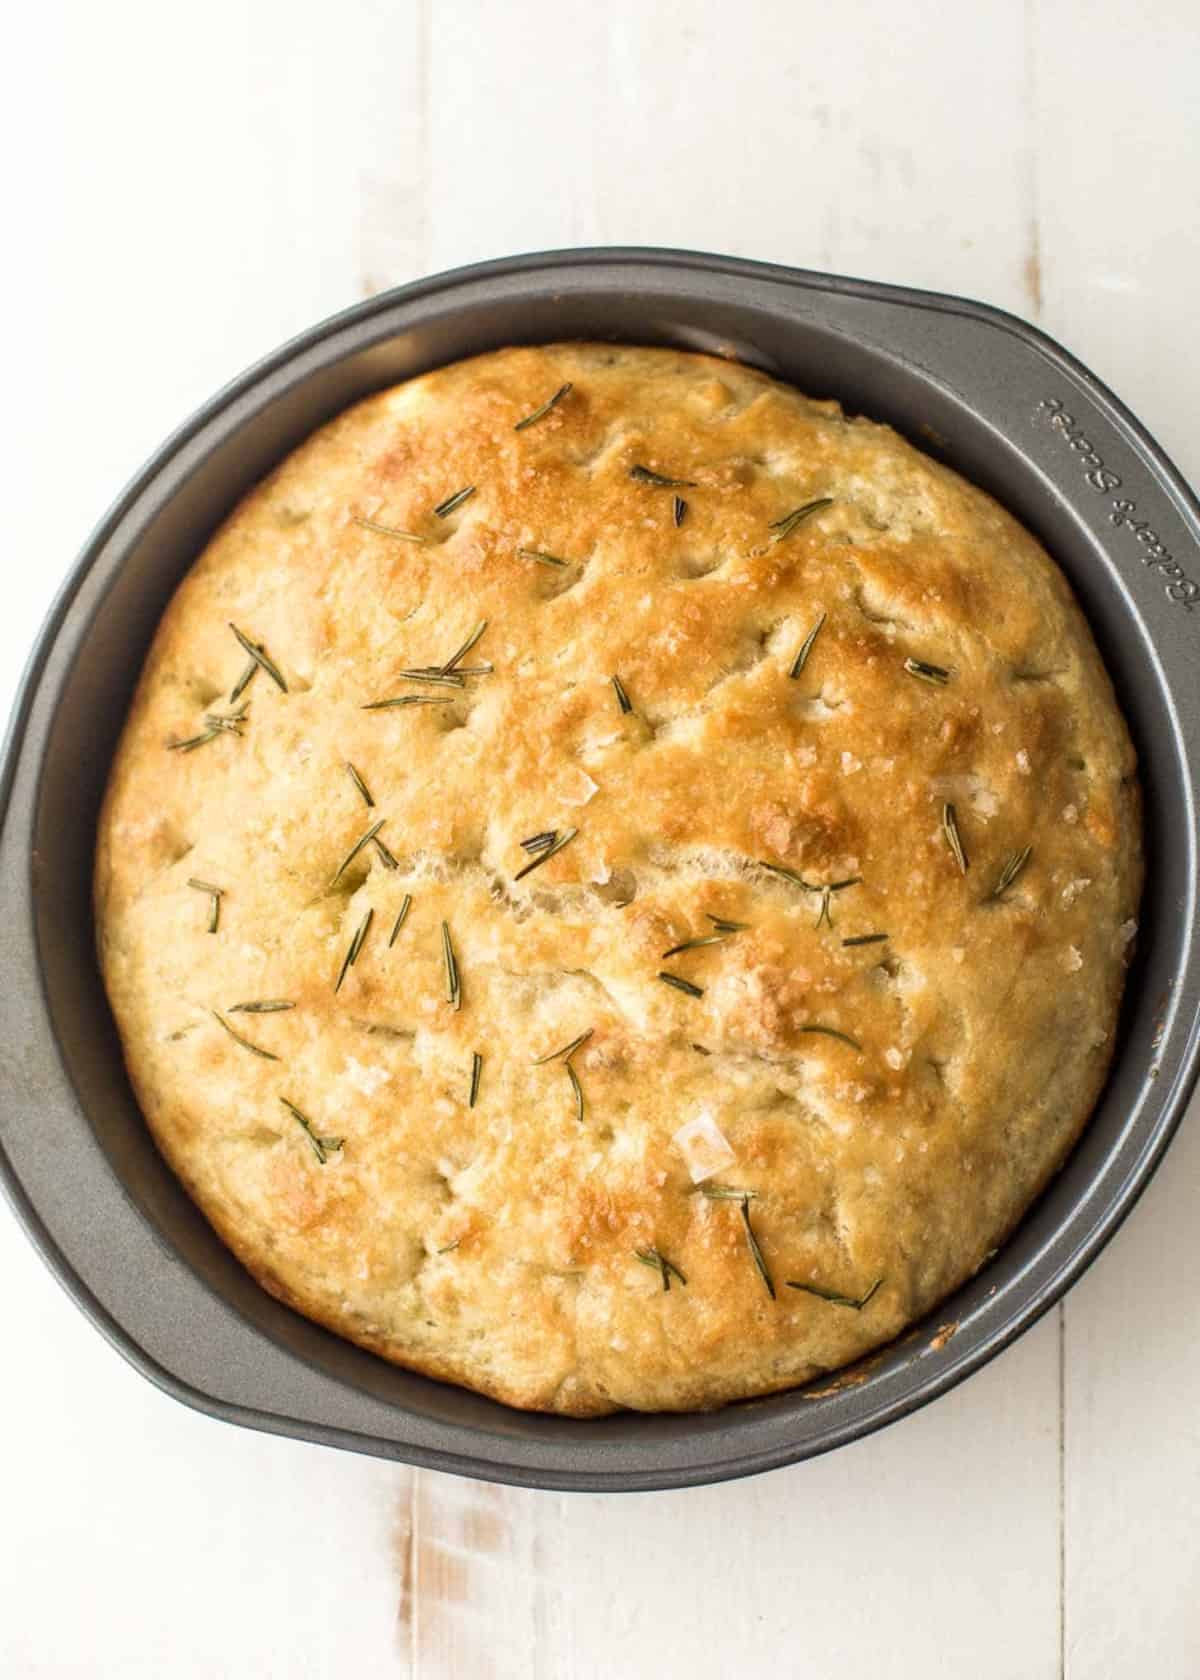 baked No knead focaccia in a round pan